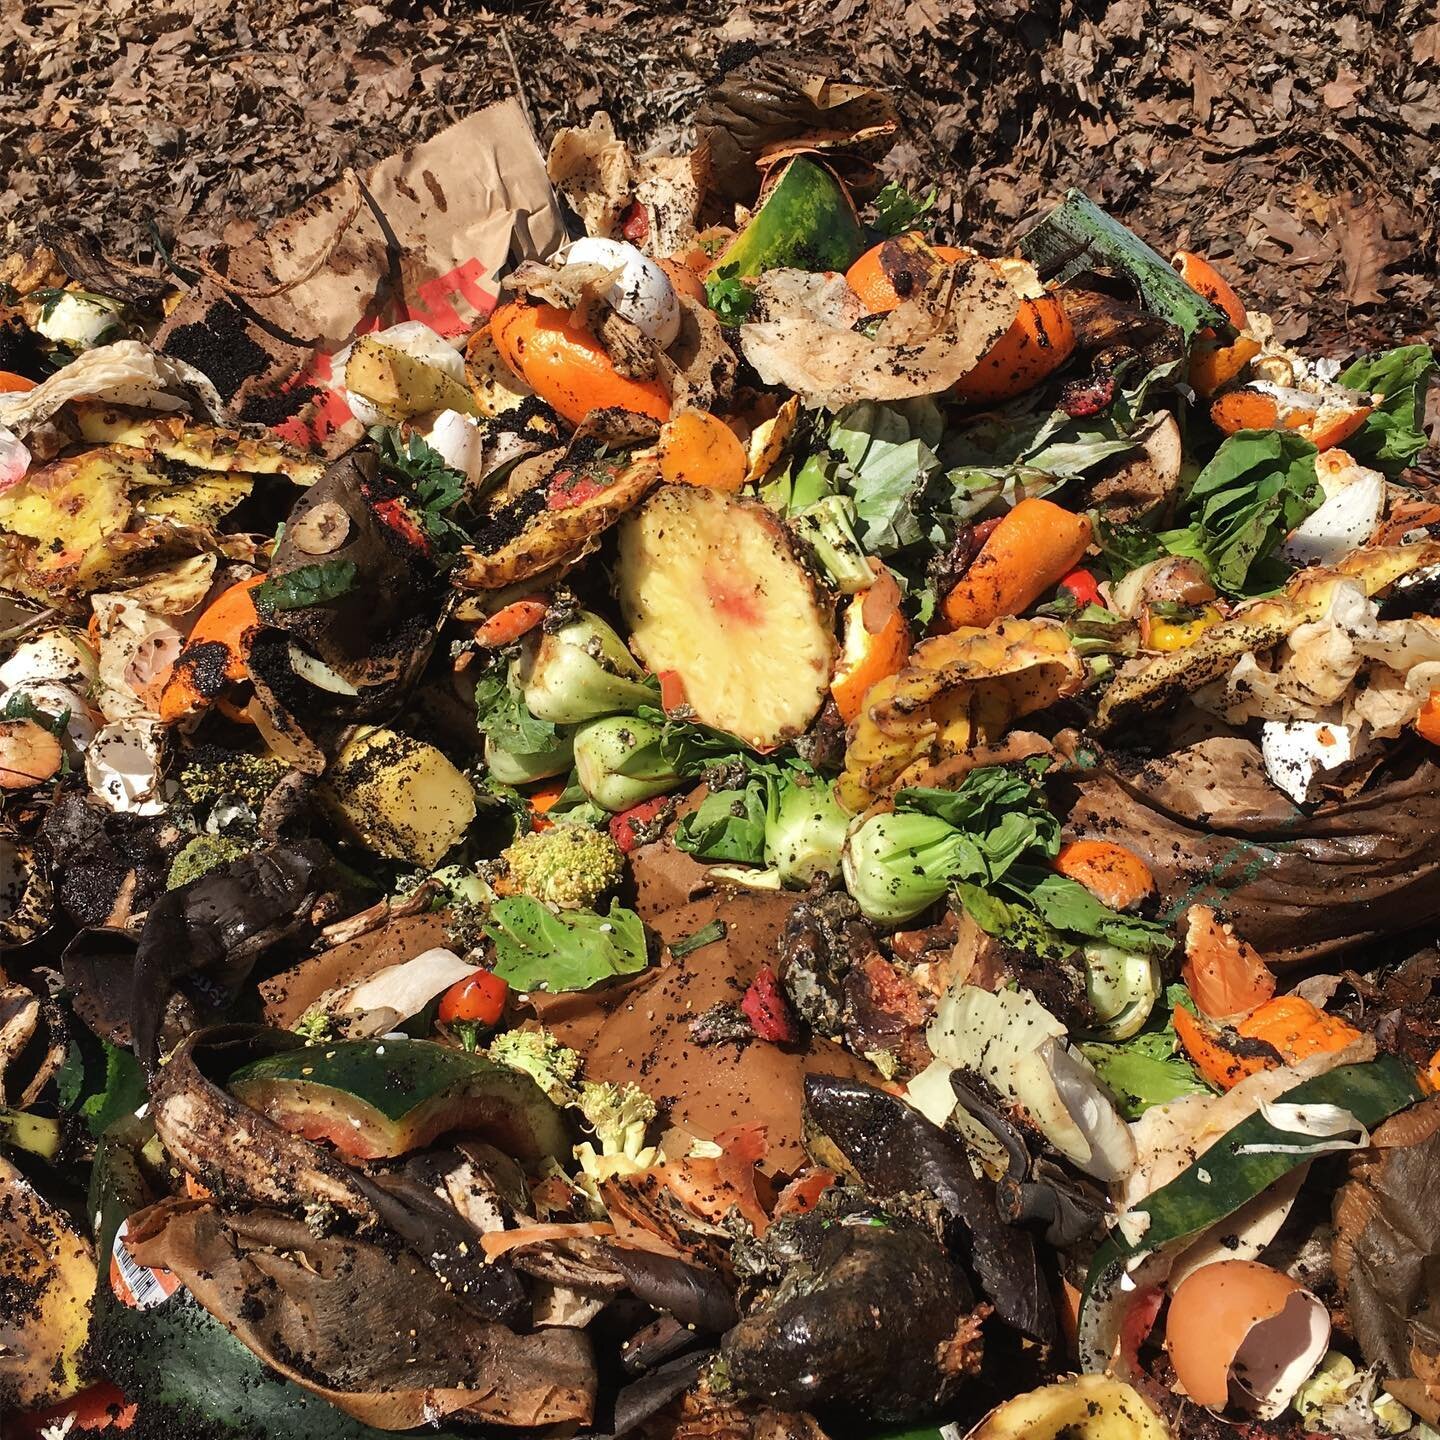 Let&rsquo;s talk about compost mindset for just a minute.

What&rsquo;s the first word that comes to mind when you see this? If you said opportunity then you&rsquo;re on the right track.

Any time you send organic material to the compost pile you&rsq